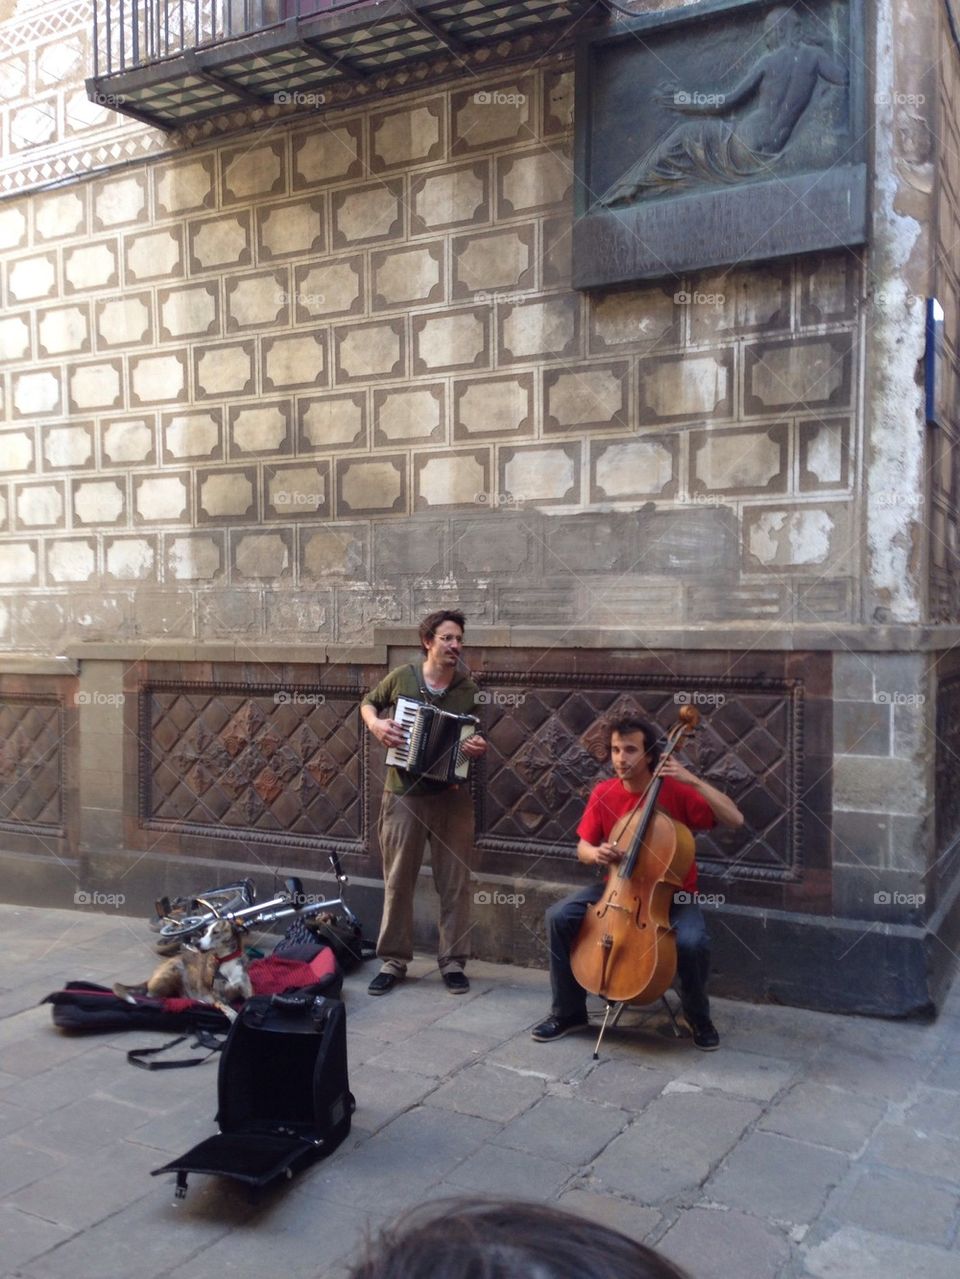 Live music in the streets of Barcelona